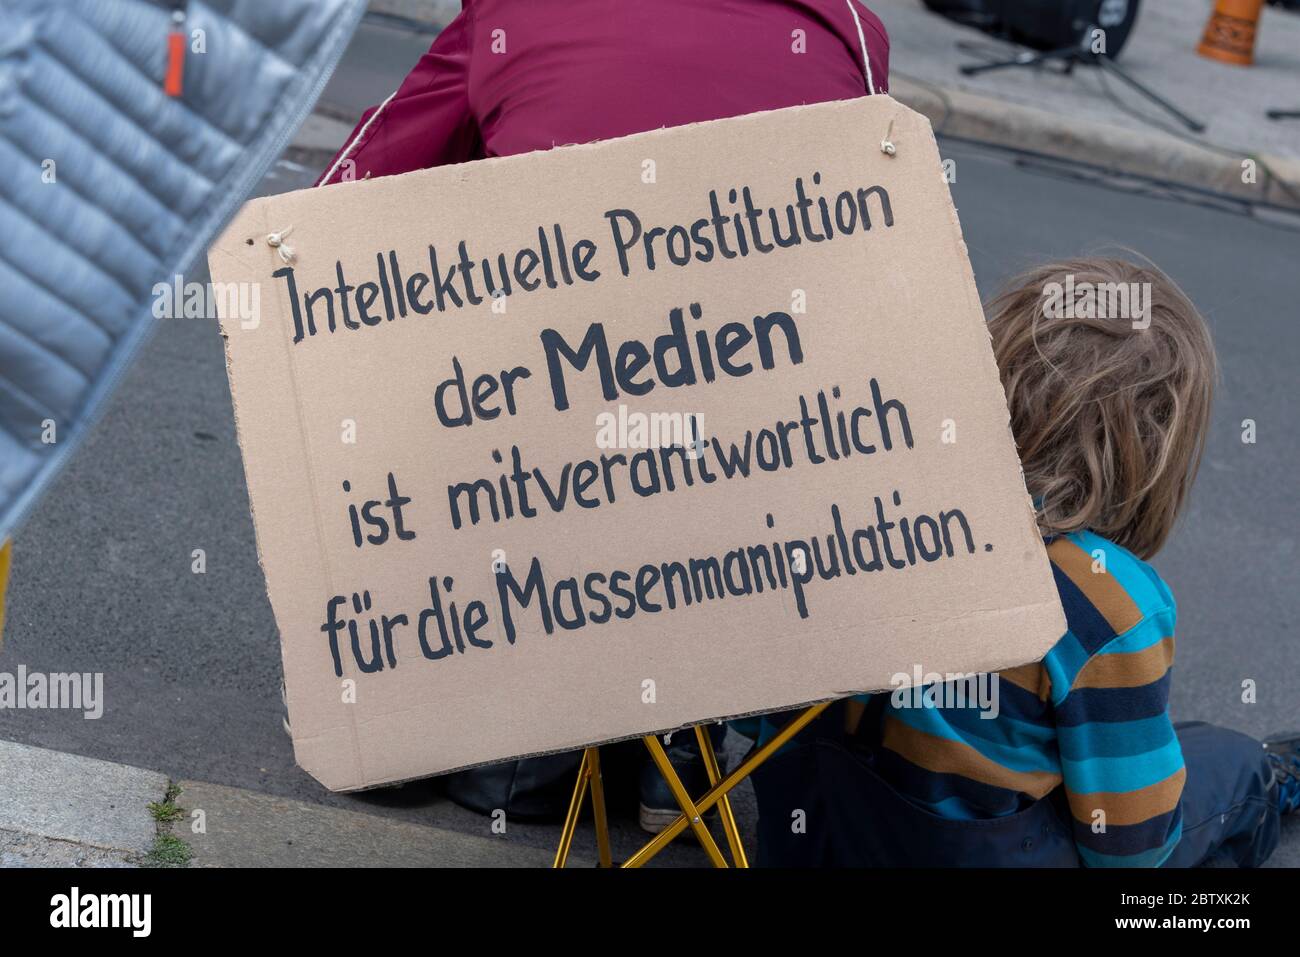 Magdeburg, Germany. 16th May, 2020. A woman is sitting with her child in the Old Market Square. On her back is a sign saying: 'Intellectual prostitution by the media is partly responsible for the mass manipulation.' In the state capital on Saturday people demonstrated on the Alter Markt against the Corona restrictions. Similar demos are taking place nationwide. Critics fear that the protests will be appropriated by right-wing groups. Credit: Stephan Schulz/dpa-Zentralbild/ZB/dpa/Alamy Live News Stock Photo